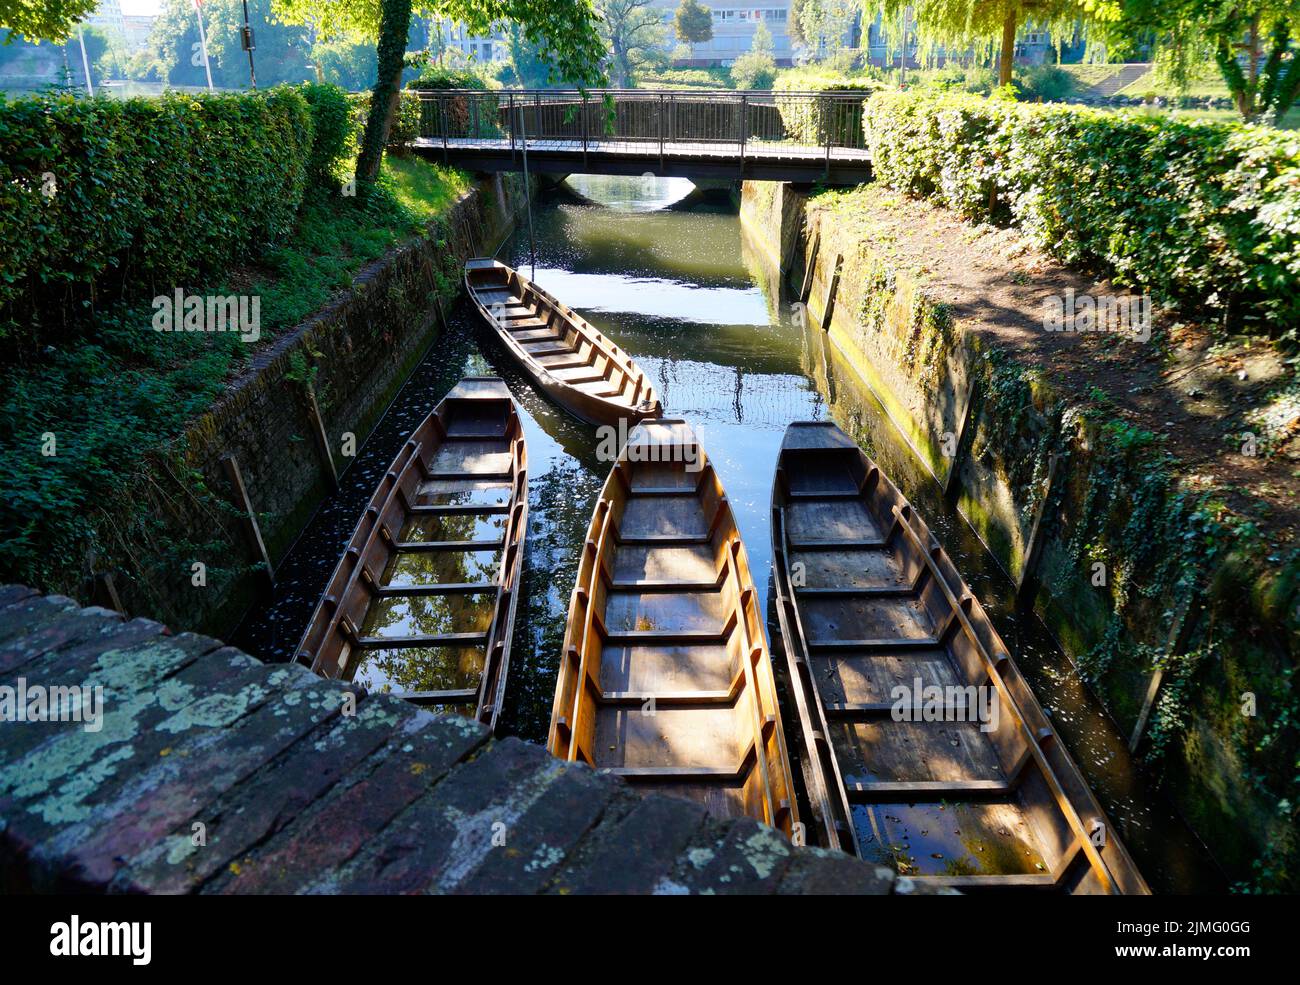 a scenic view of a little bridge, wooden boats (Ulmer Schachteln) underneath it, green trees and the old town wall in the city of Ulm in Germany Stock Photo